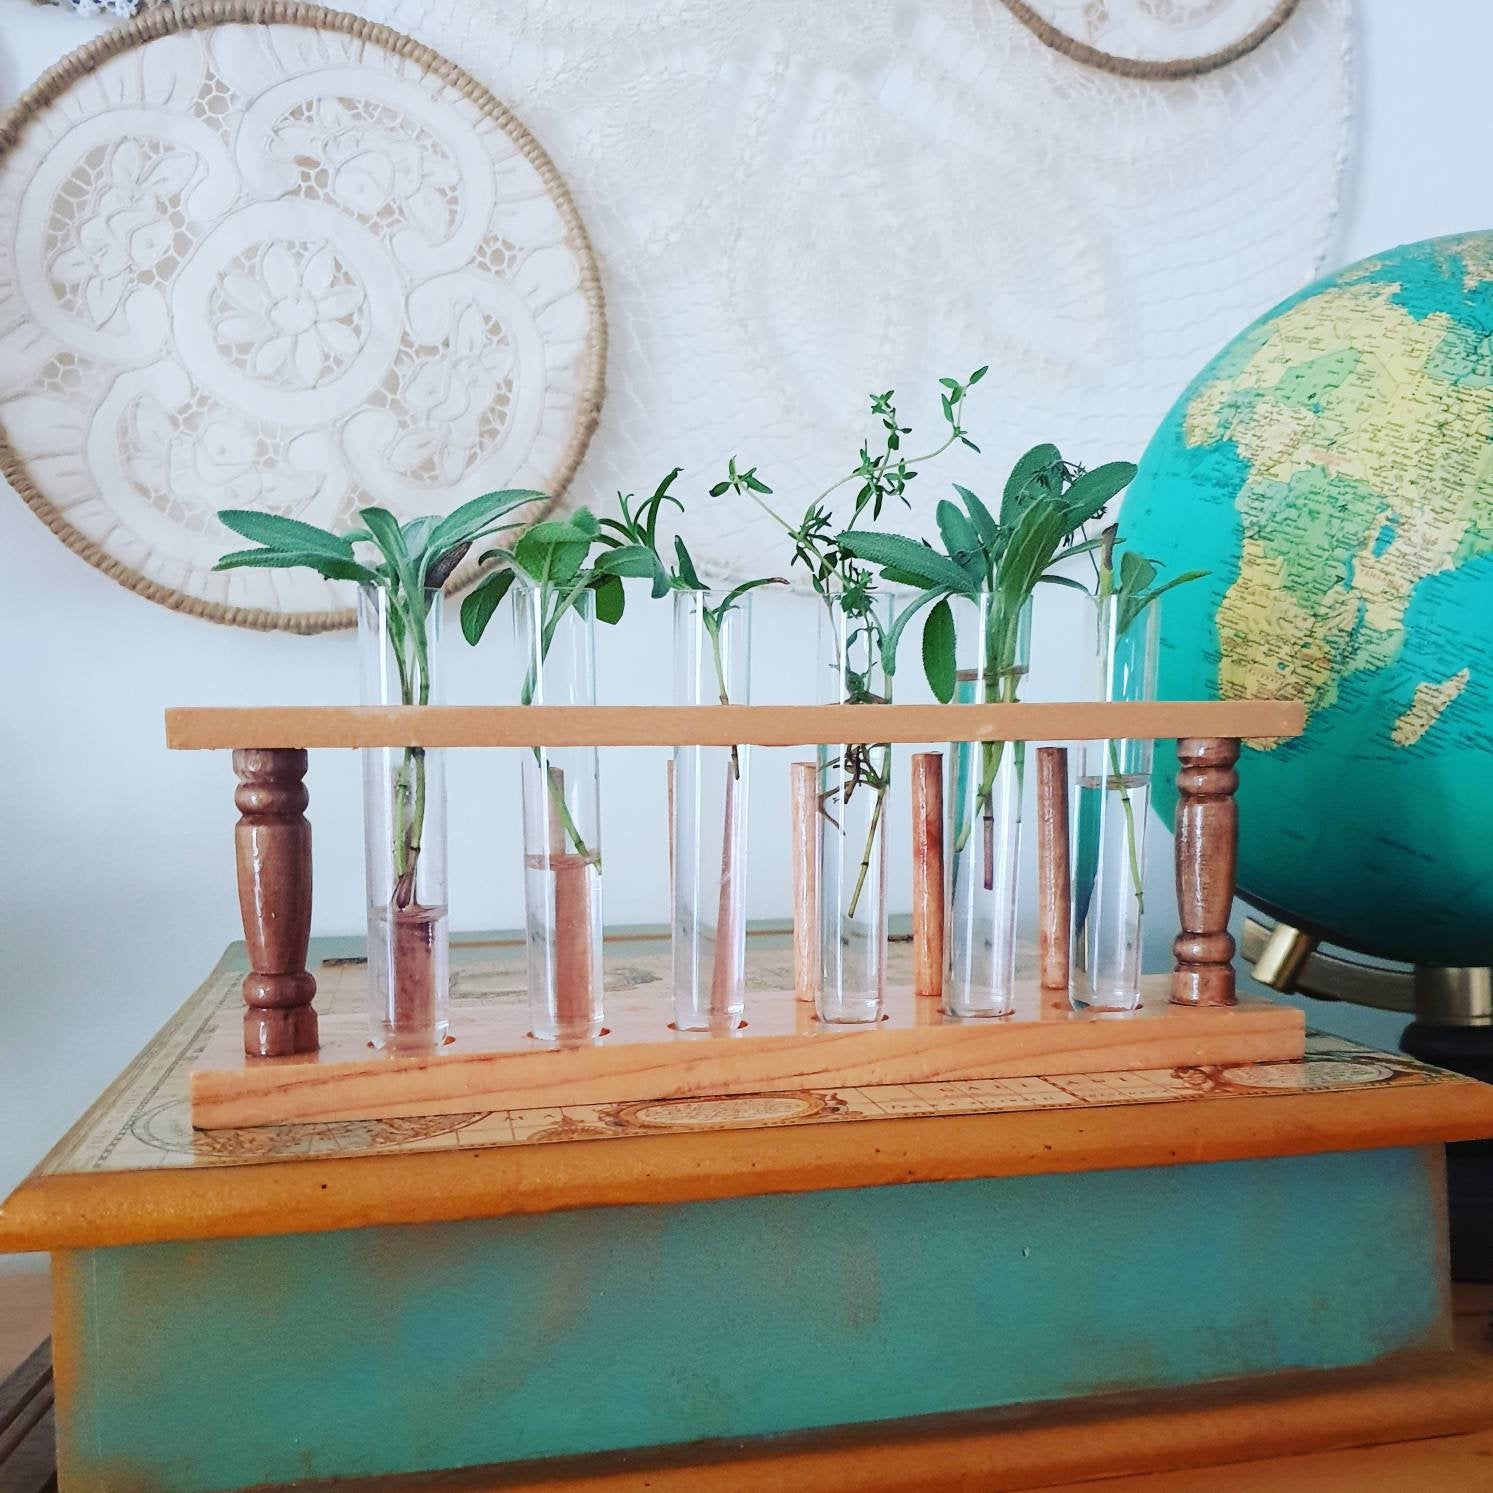 Propagation Station - Wooden Test tube rack holder for growing plants herbs to propagate